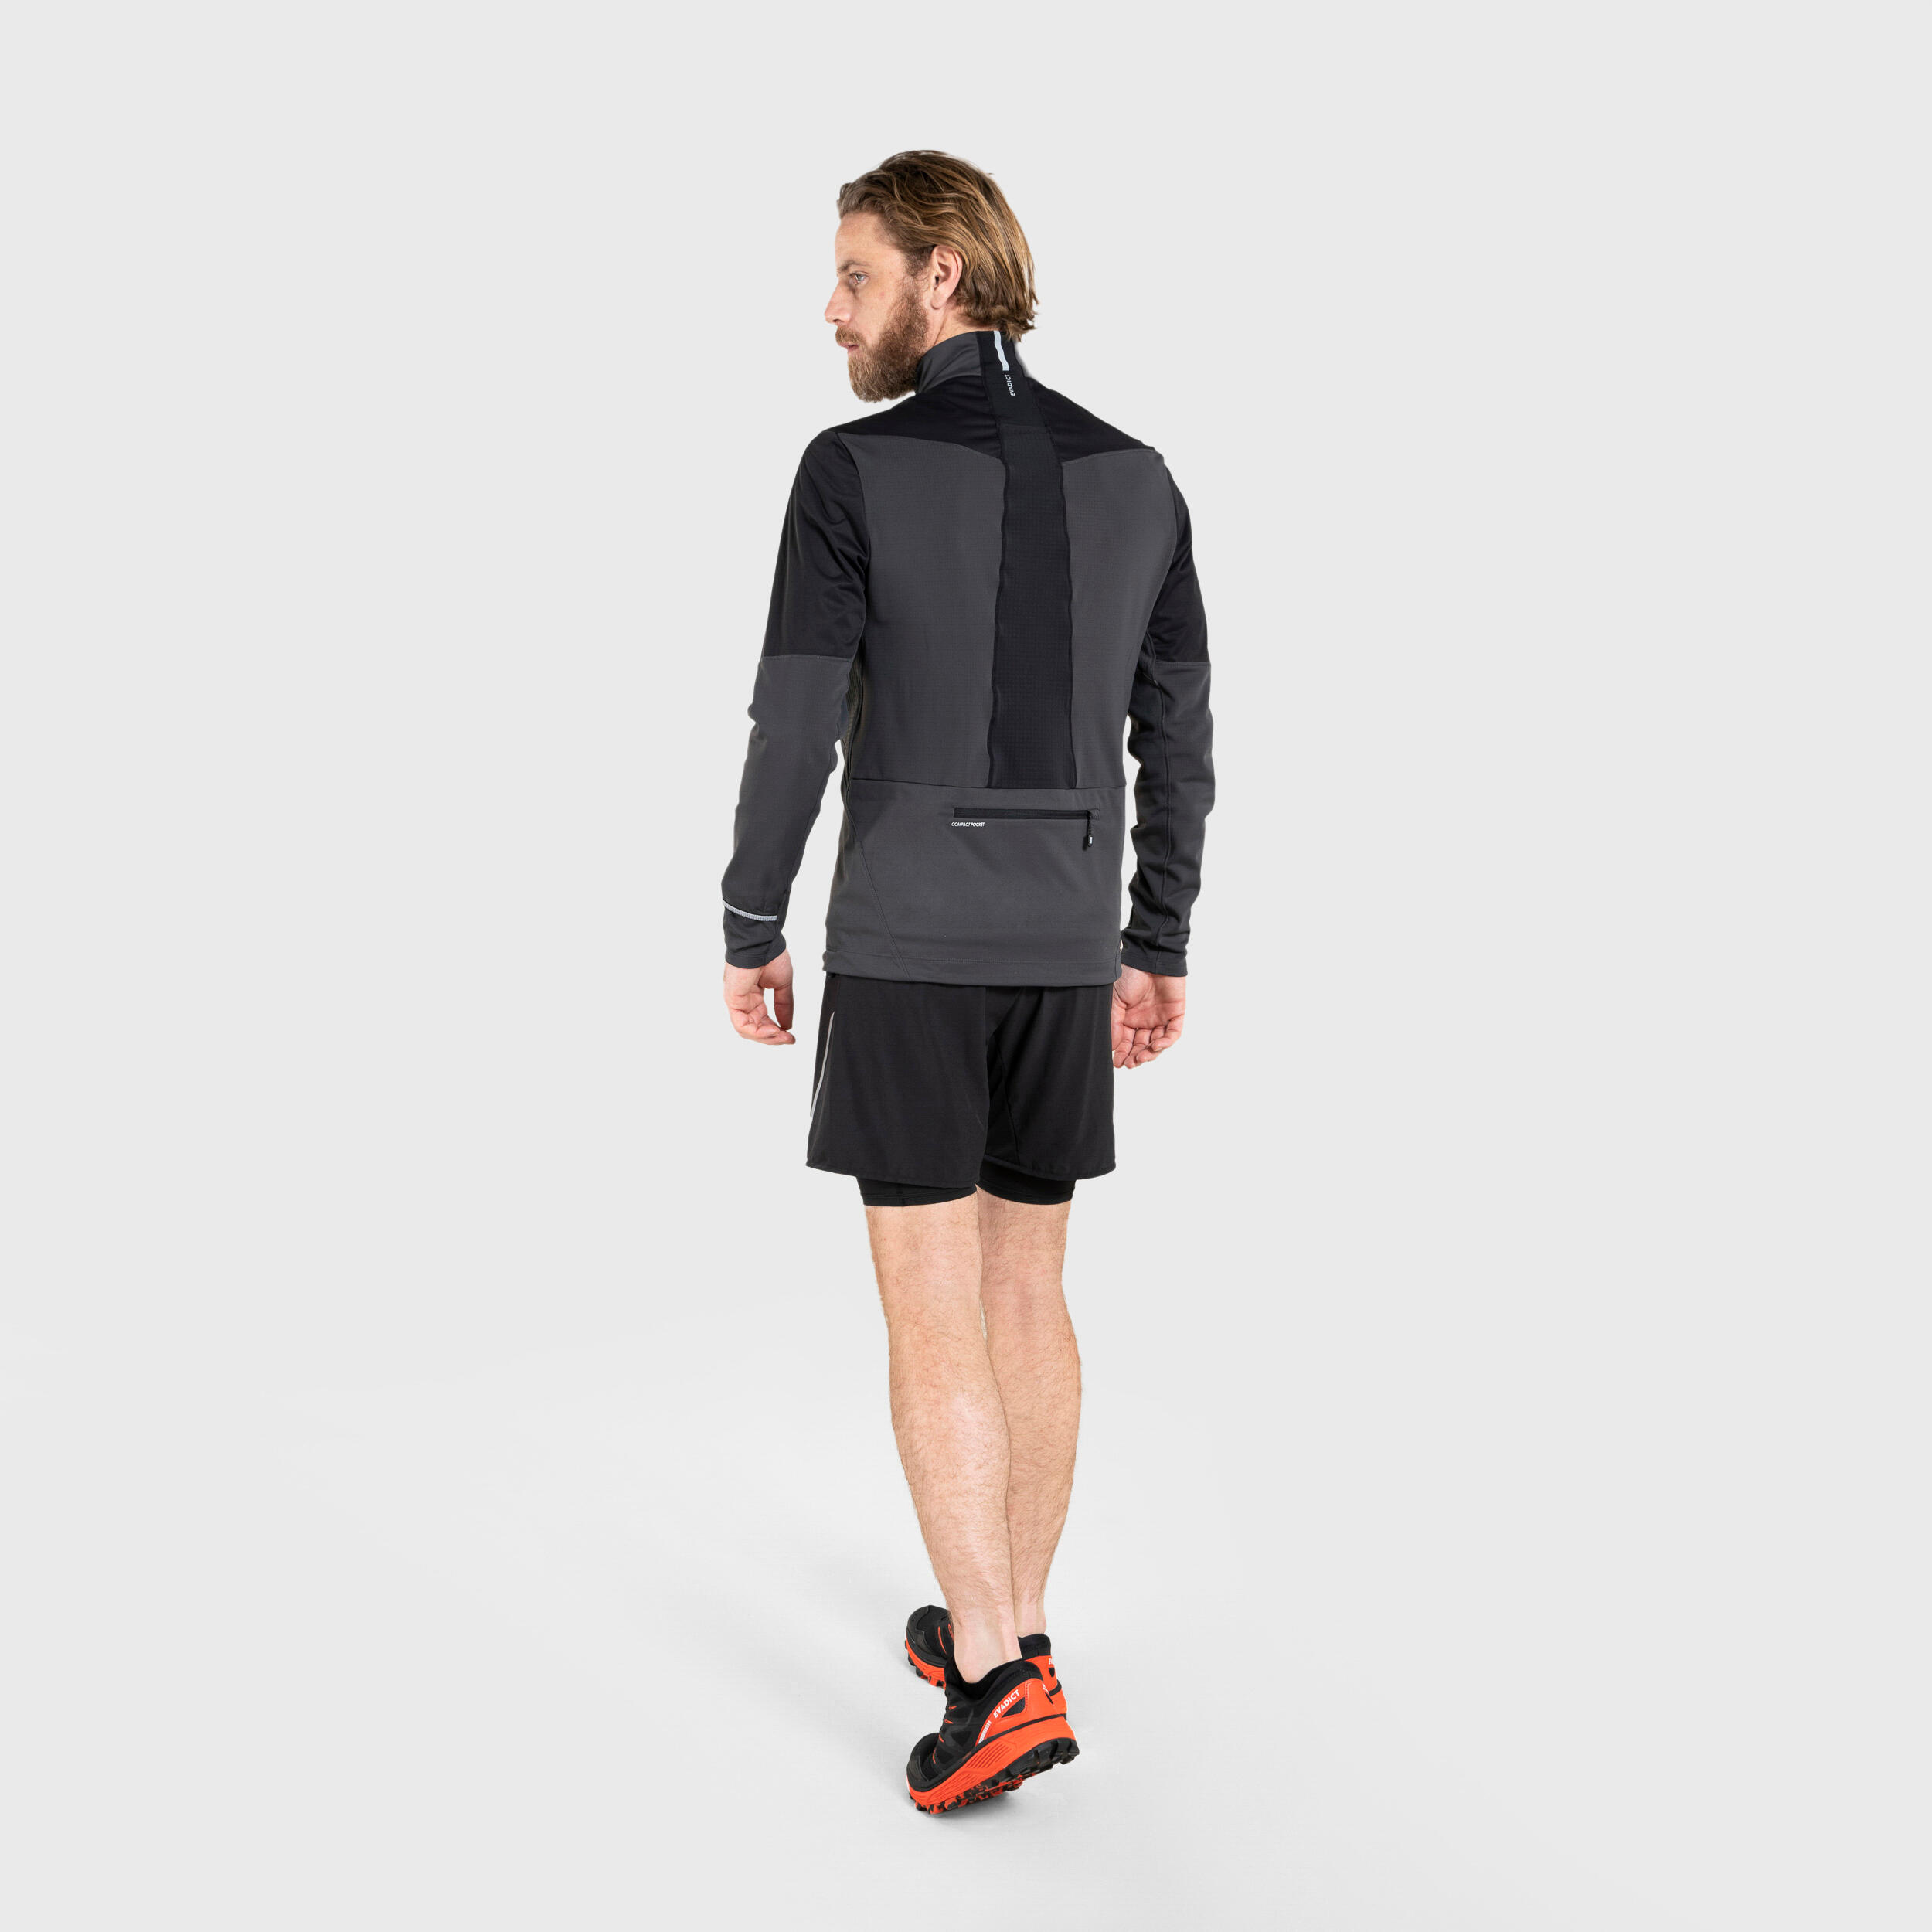 MAILLOT DE TRAIL RUNNING MANCHES LONGUES SOFTSHELL HOMME NOIR GRIS 8/8